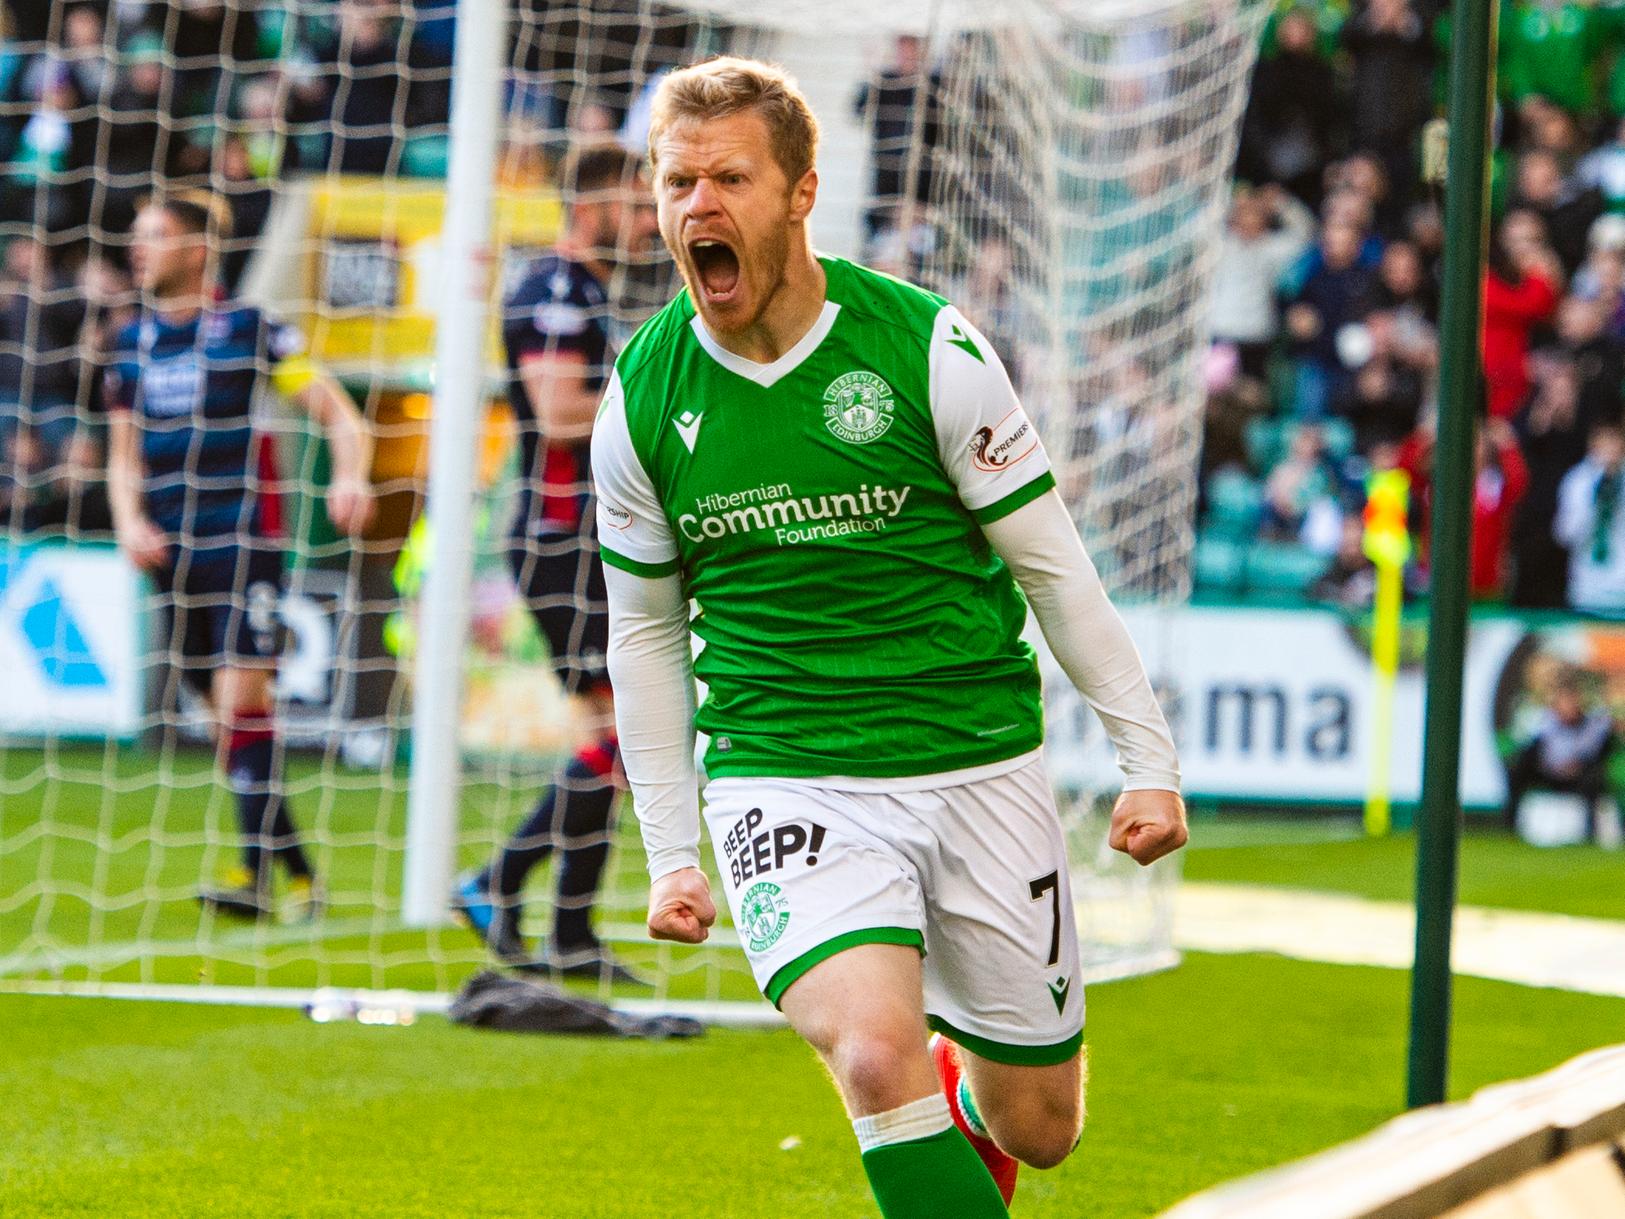 The substitute made an instant impact when he scored a well-taken goal five minutes after coming on at the start of the second half. Hibs most dangerous attacker.